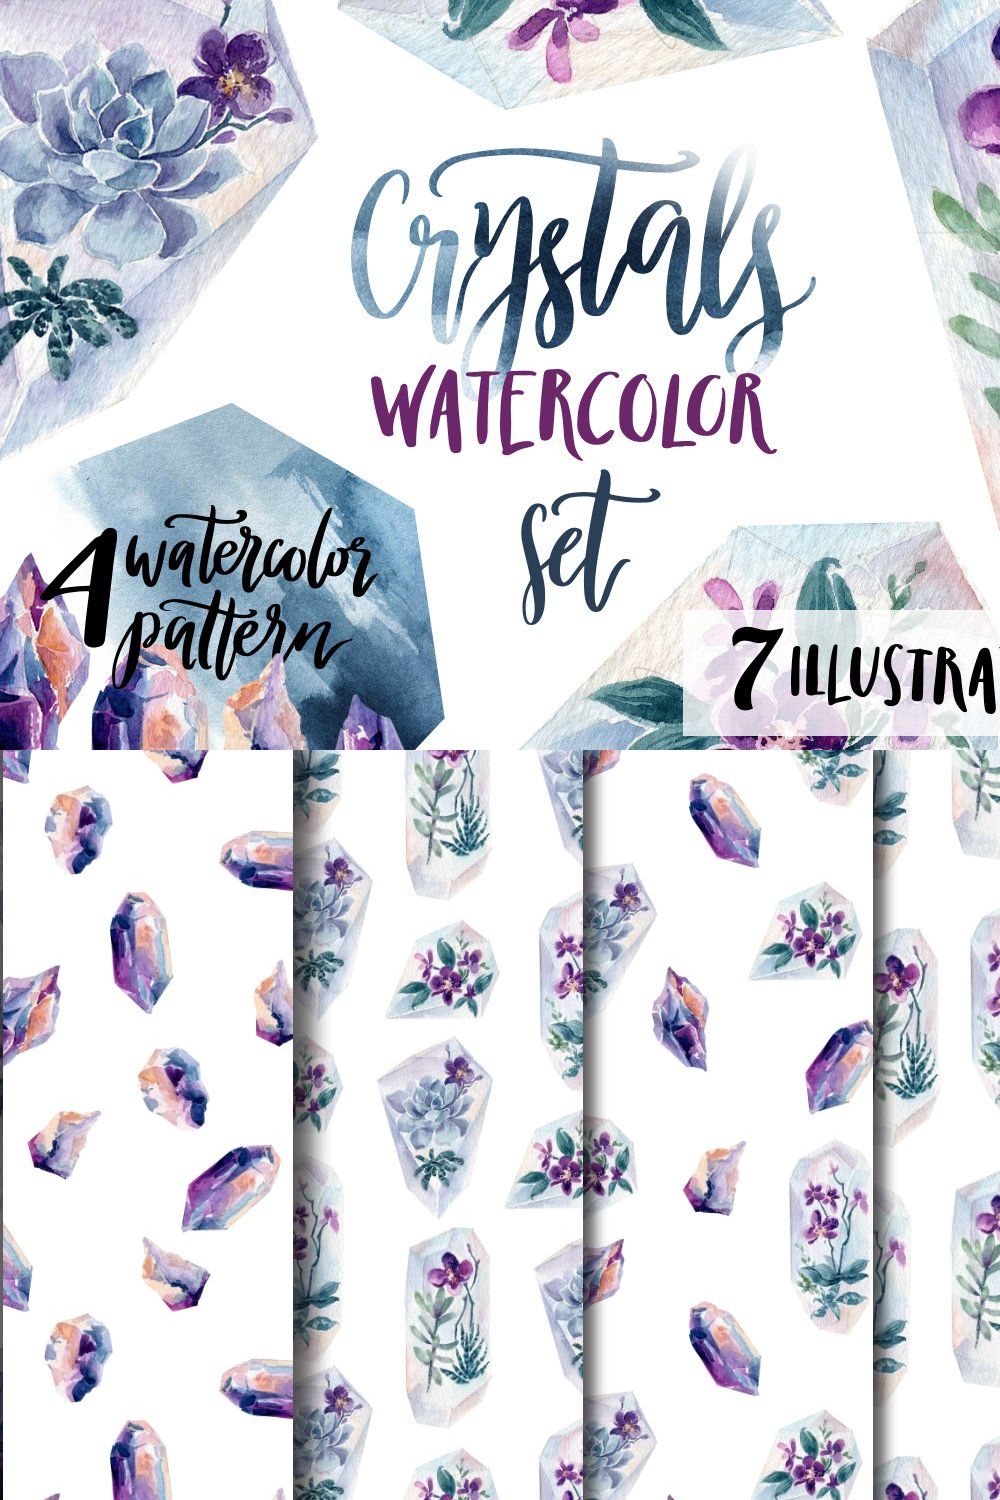 Crystal watercolor set pinterest preview image.